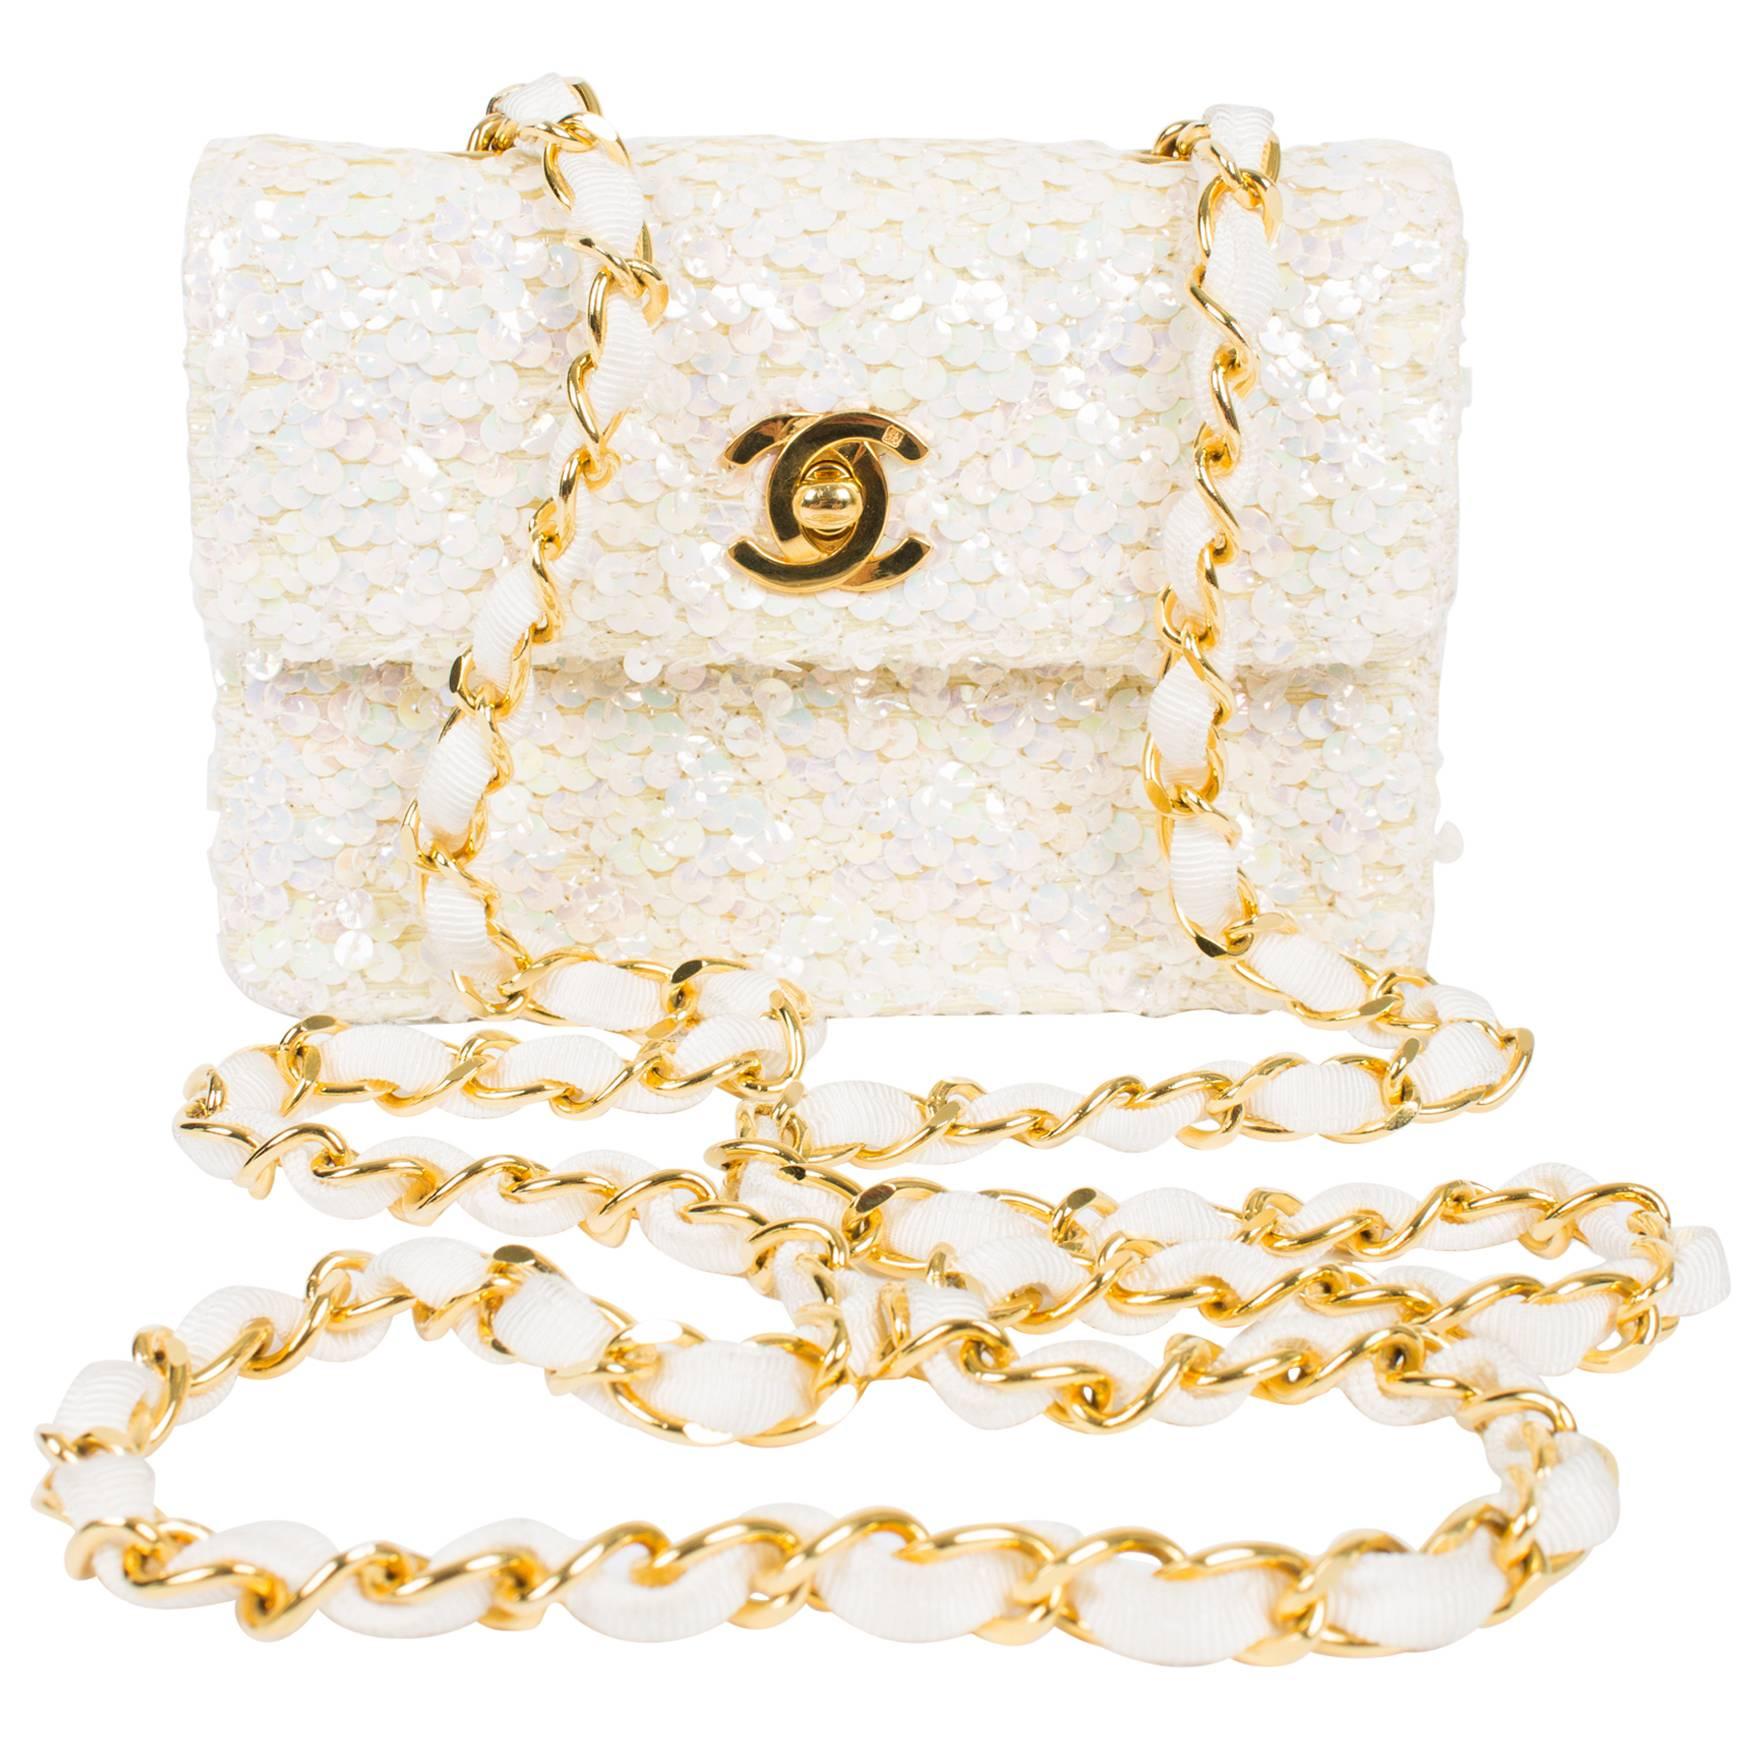 Chanel Iridescent Micro Flap Bag - ivory/sequins/gold